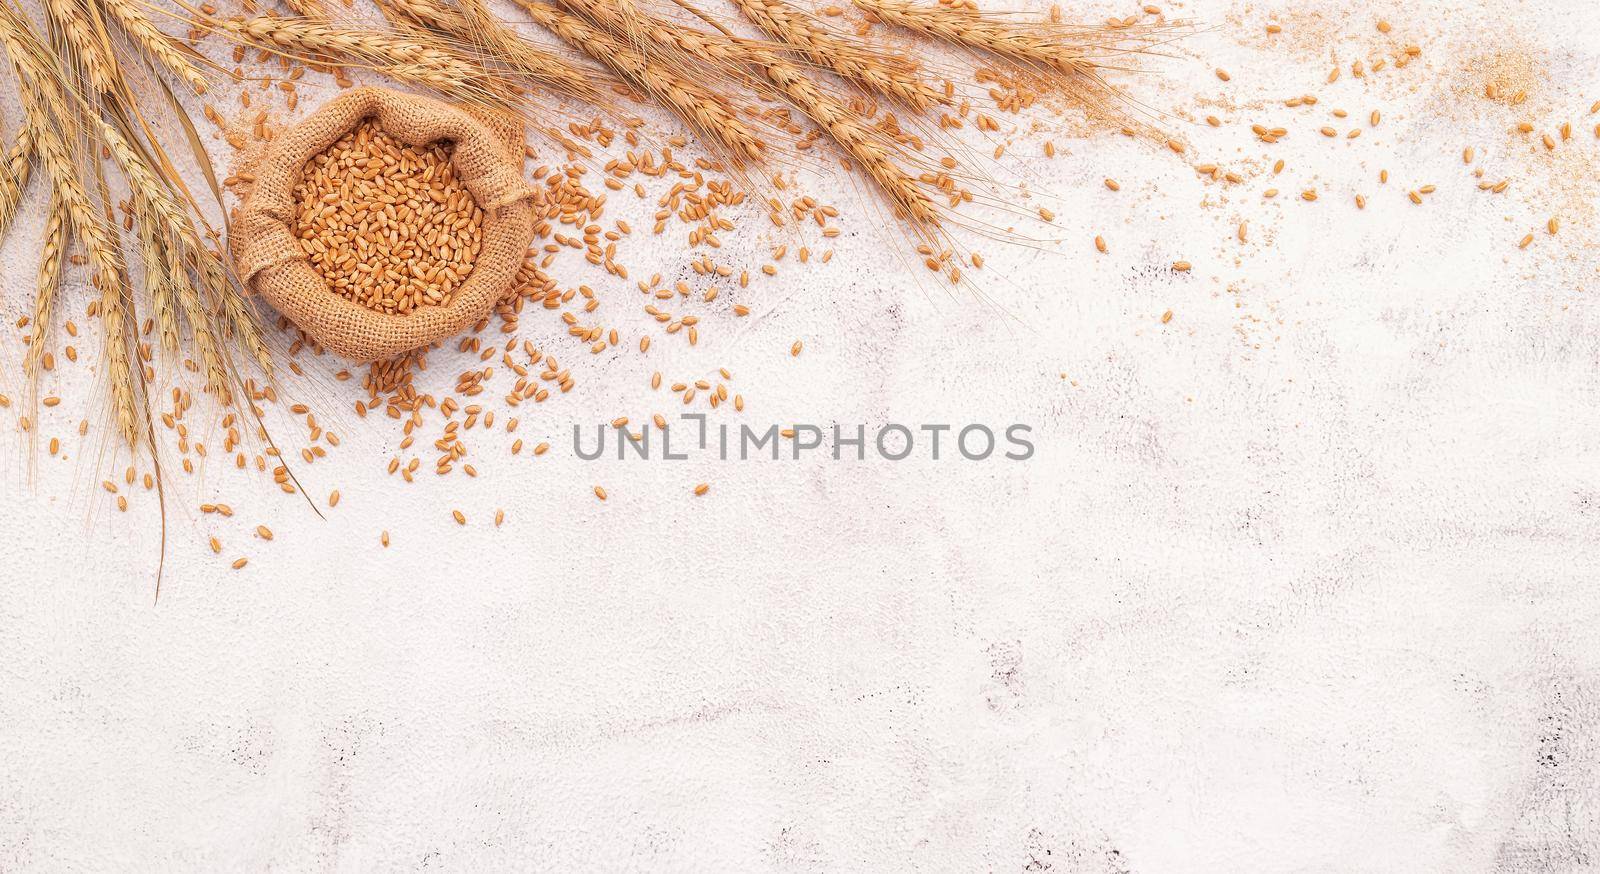 Wheat ears and wheat grains set up on white concrete background.